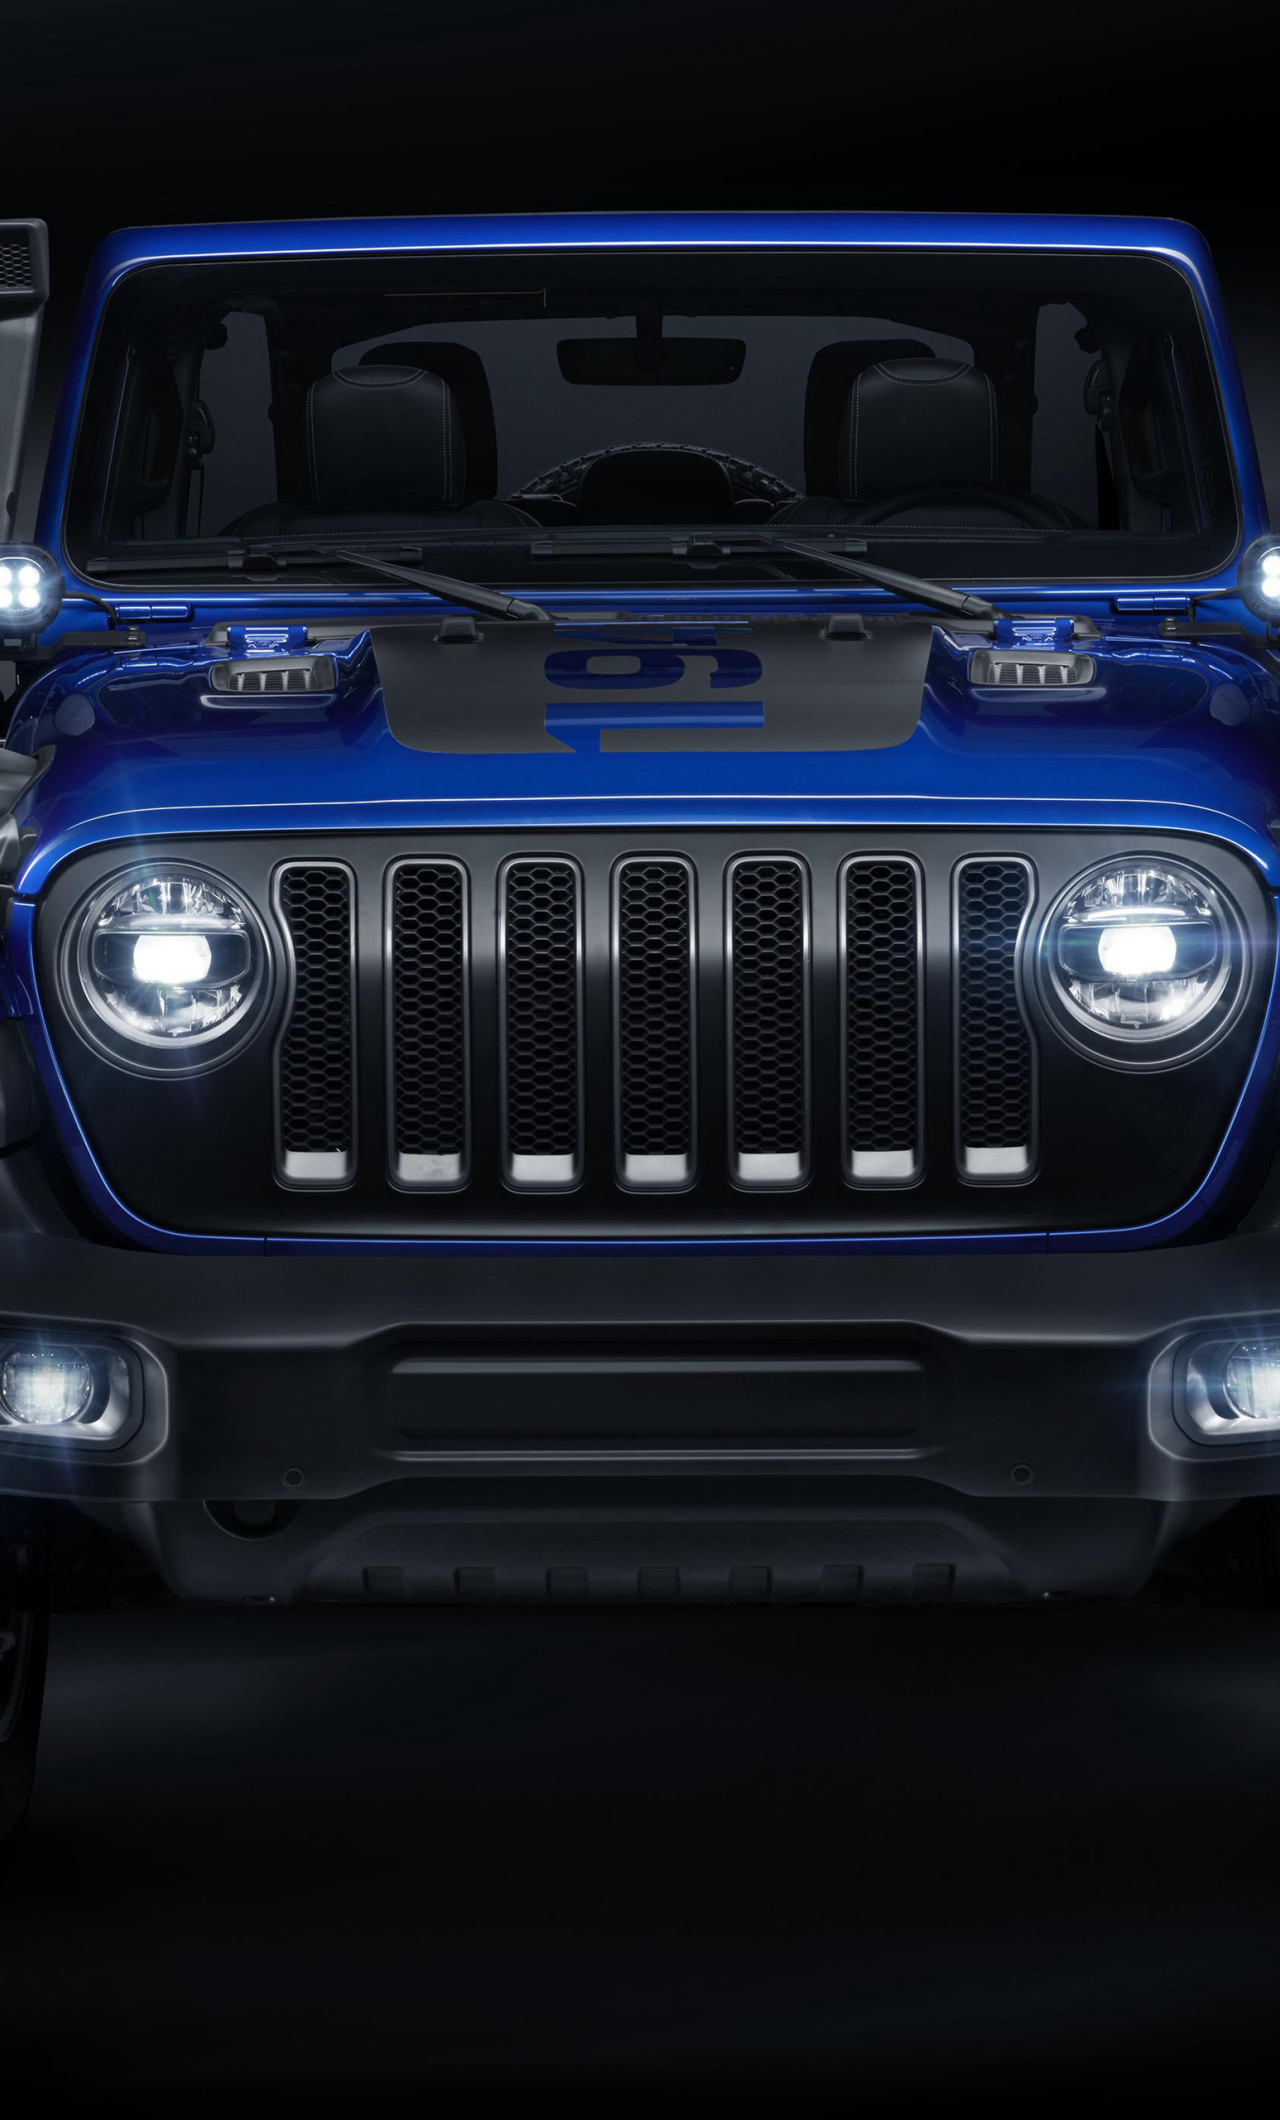 Download wallpaper 1280x2120 jeep wrangler unlimited, 4x4, moparized,  iphone 6 plus, 1280x2120 hd background, 3932